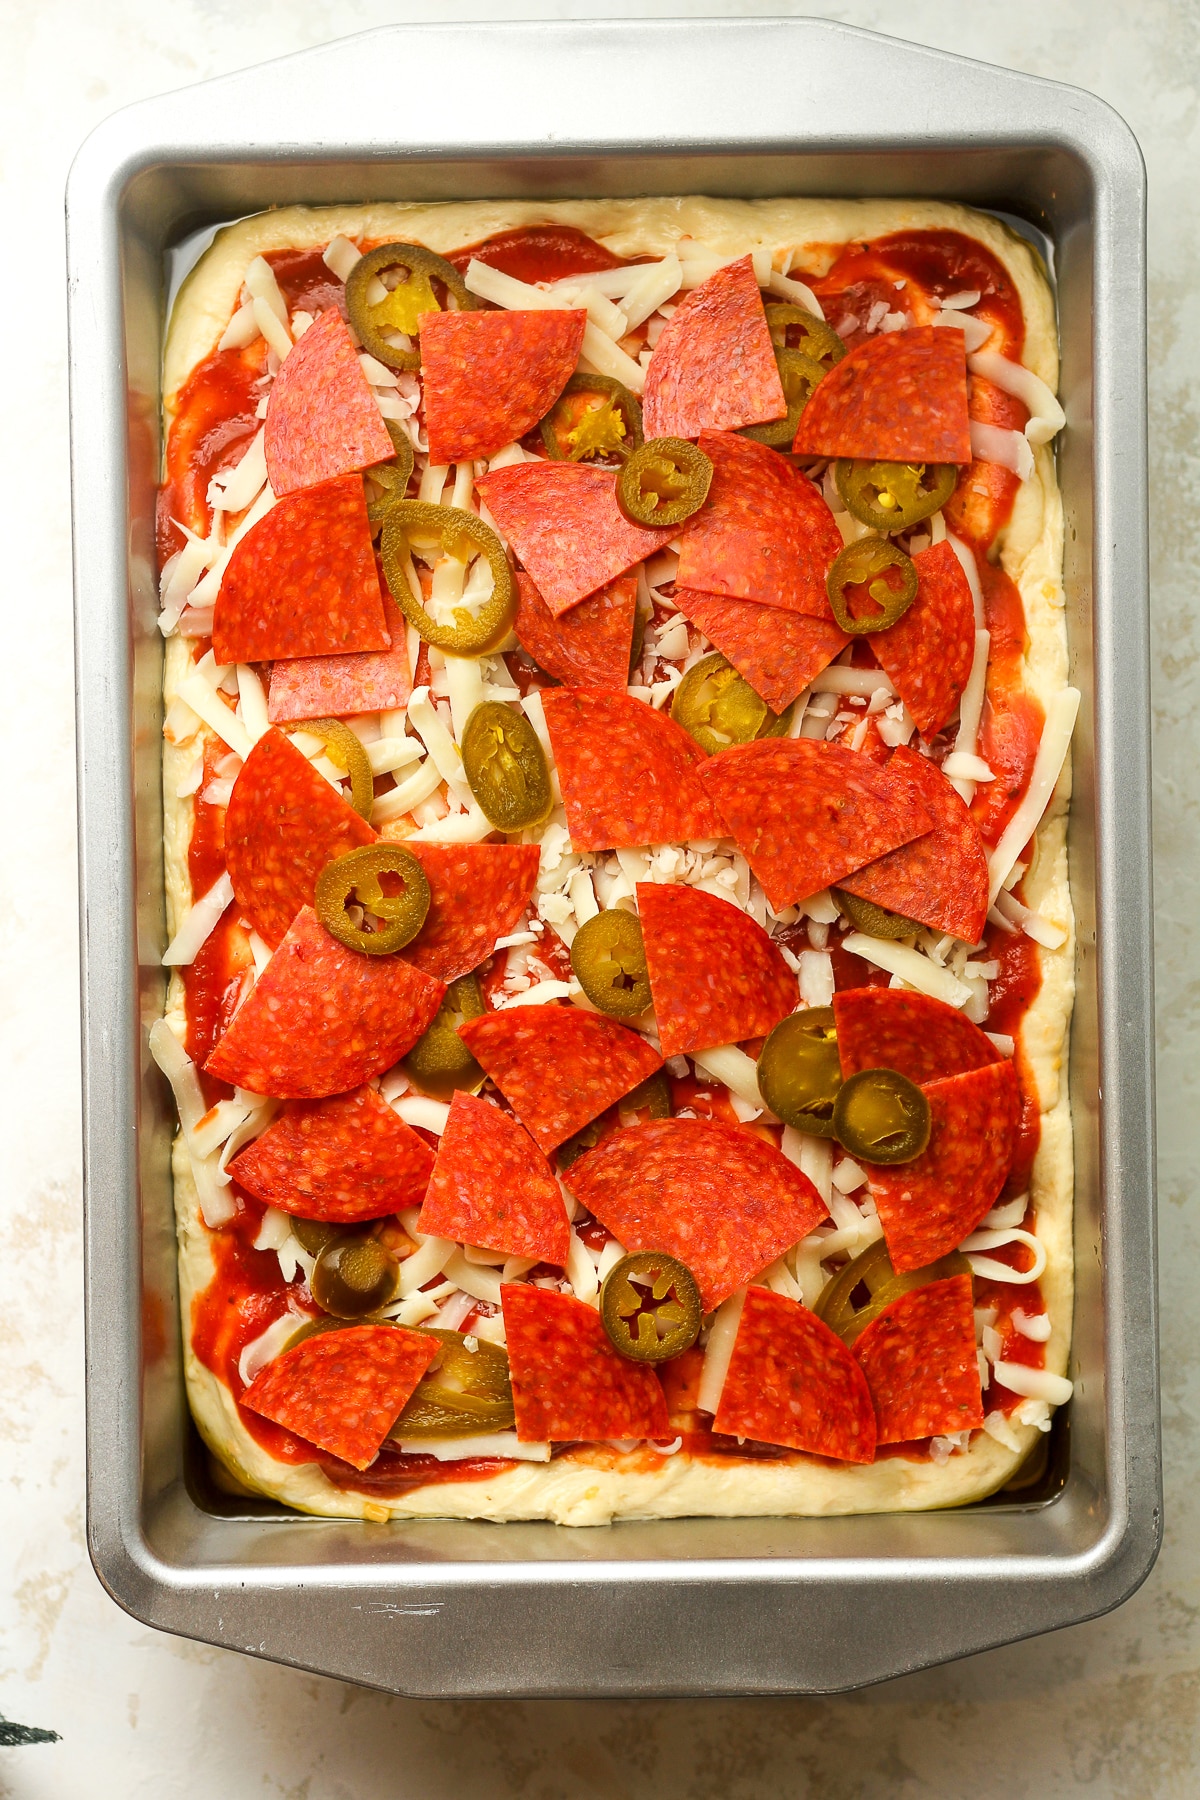 A pan of the focaccia pizza before baking.